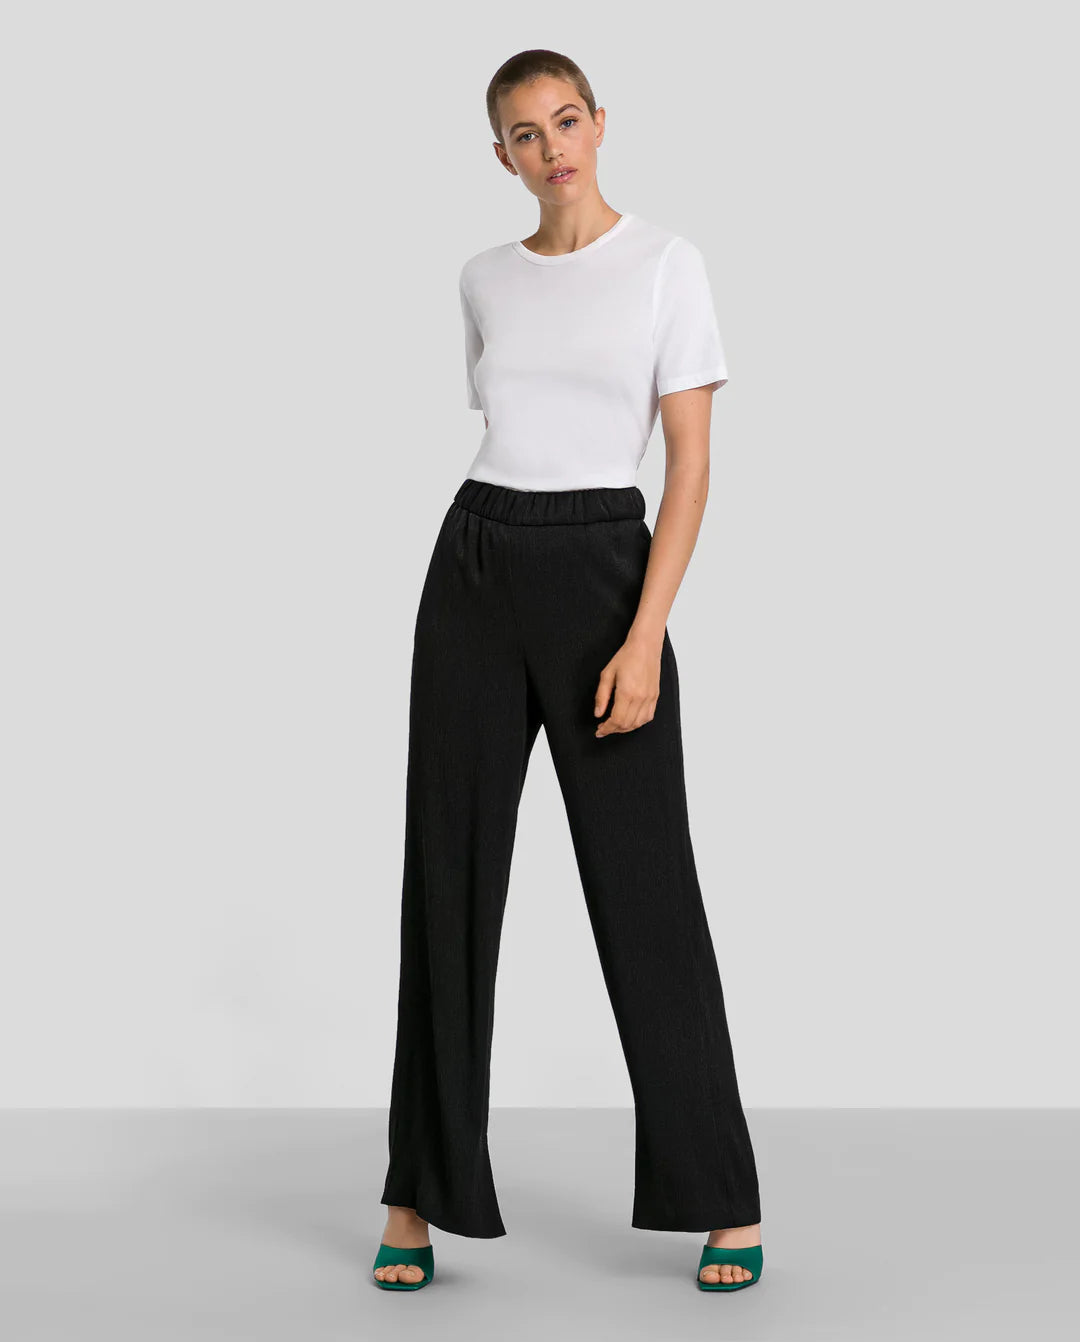 Finely pleated pants in black